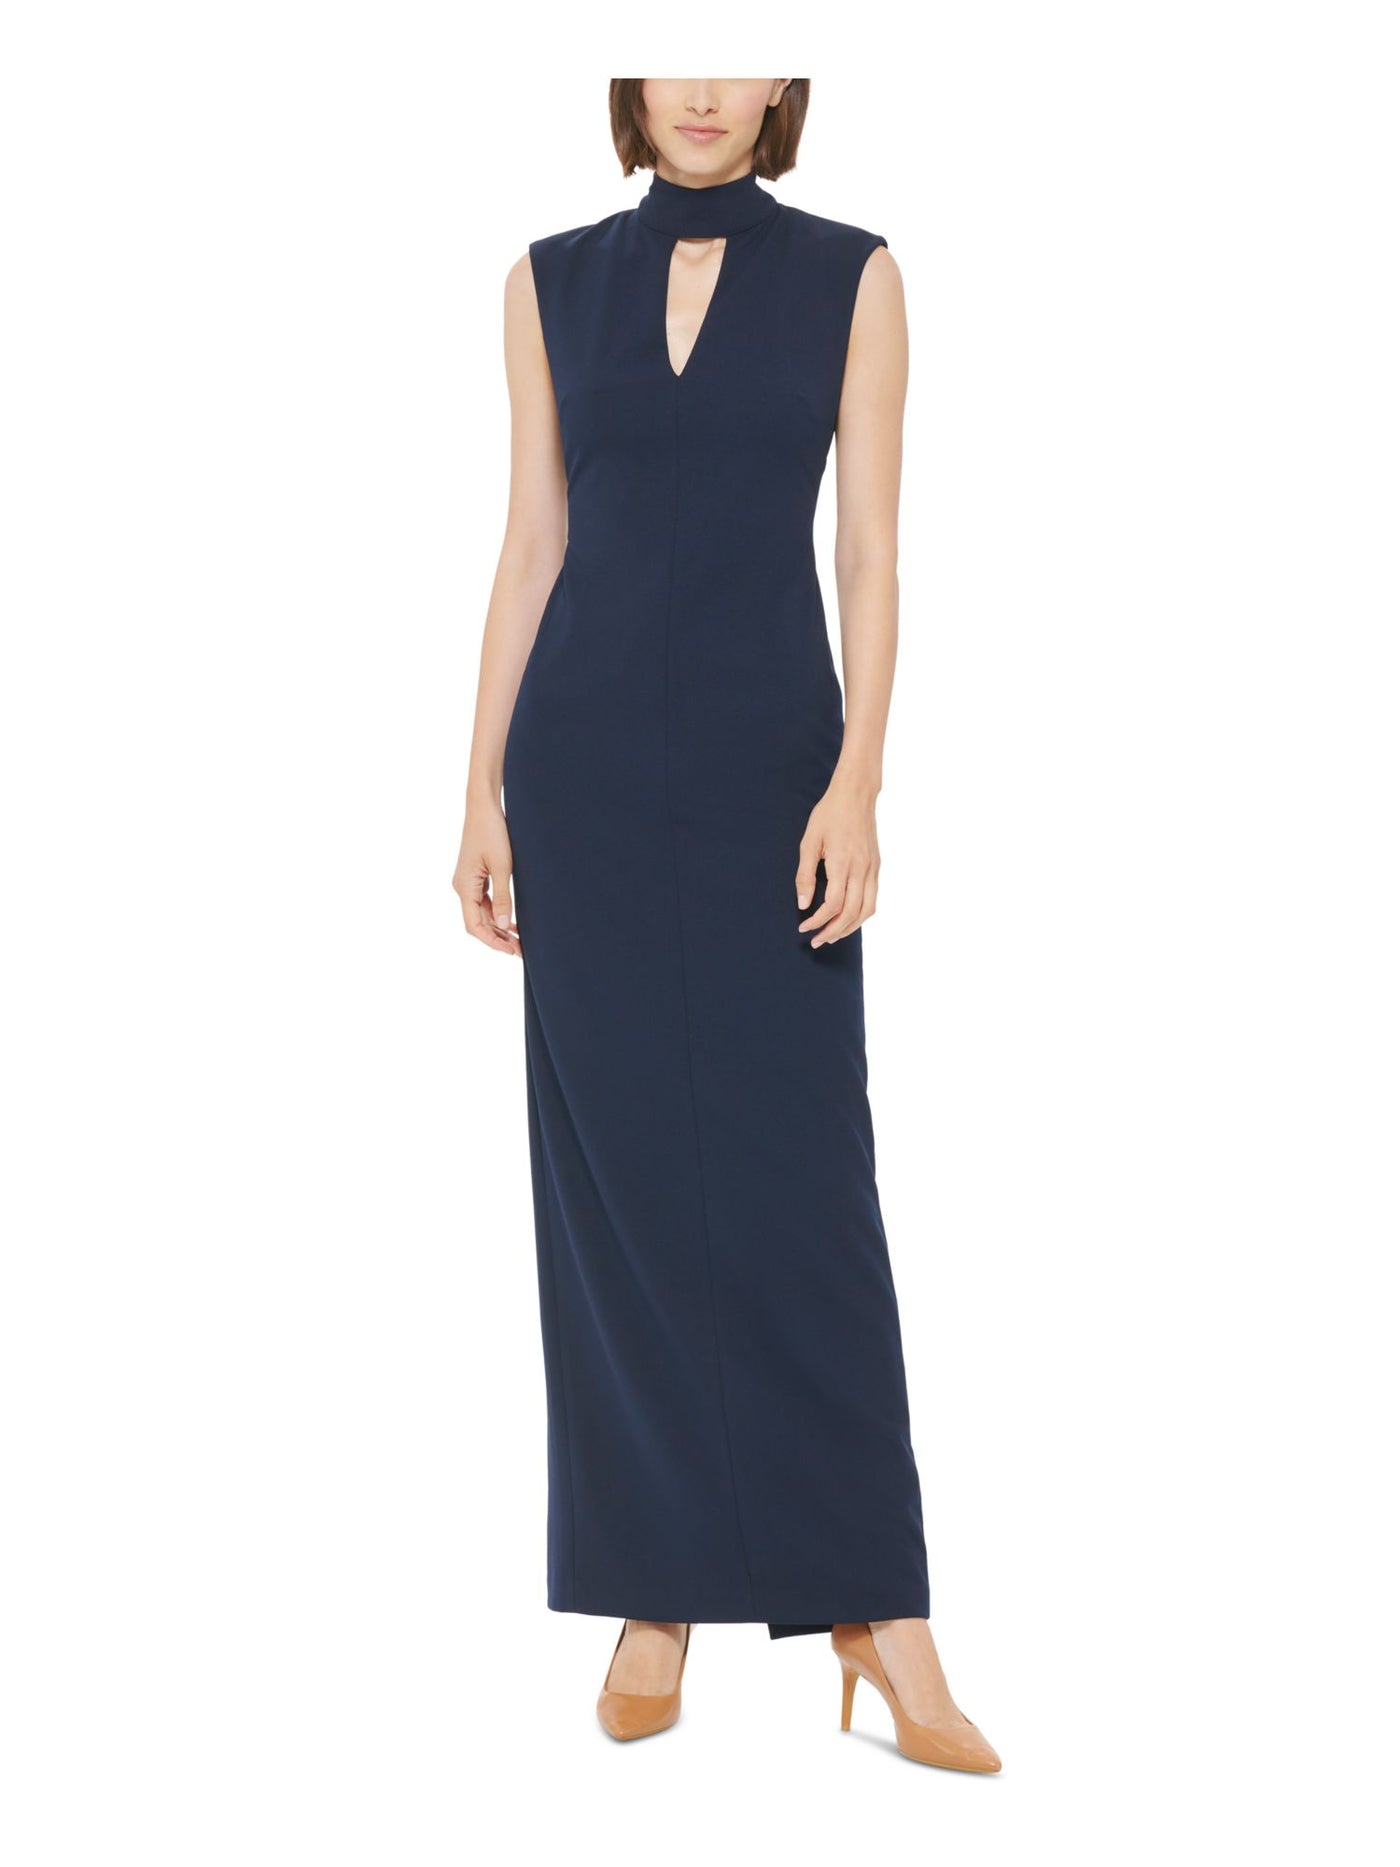 CALVIN KLEIN Womens Navy Cut Out Zippered Slit Darted Lined Tie Sleeveless Mock Neck Full-Length Formal Gown Dress 8